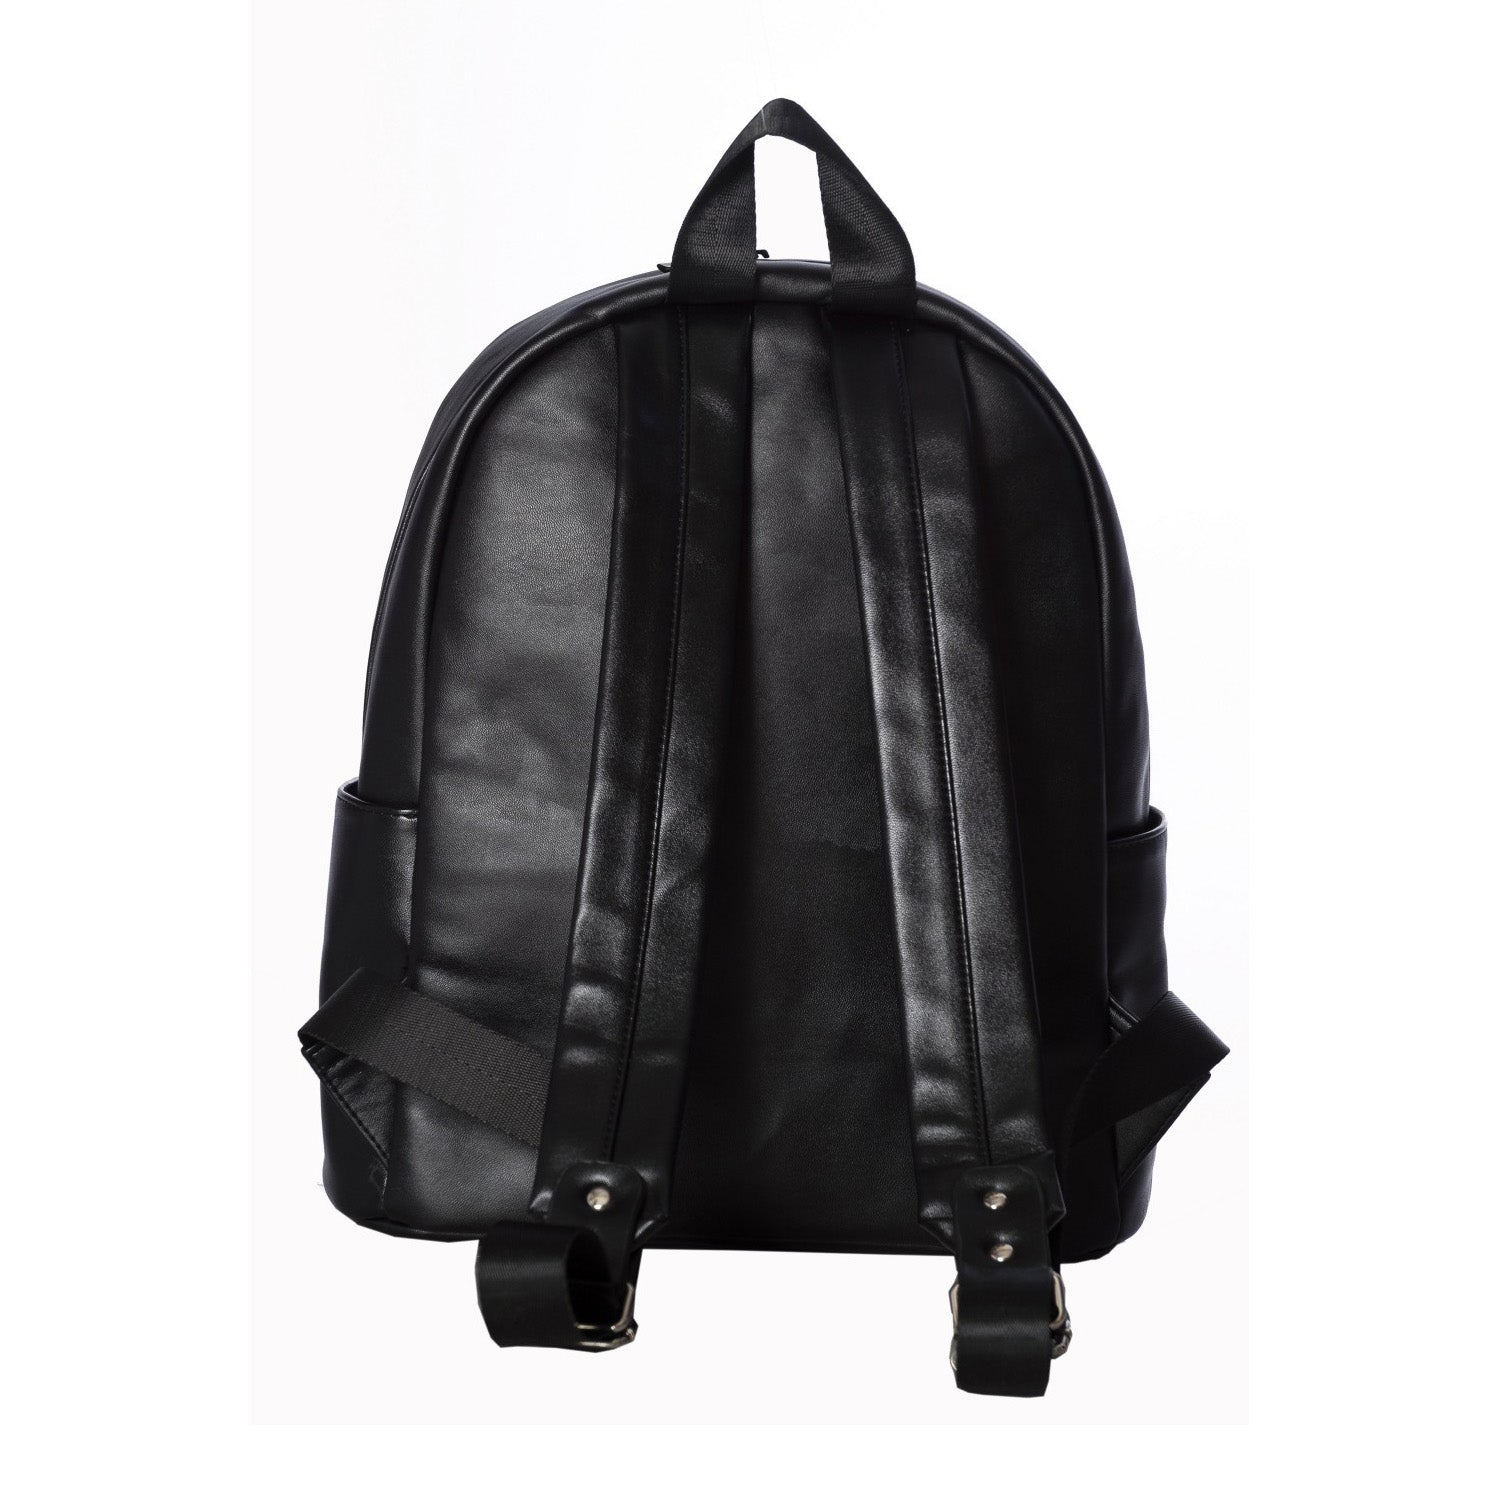 Black Backpack Bag with Embroidered Model Face Detail